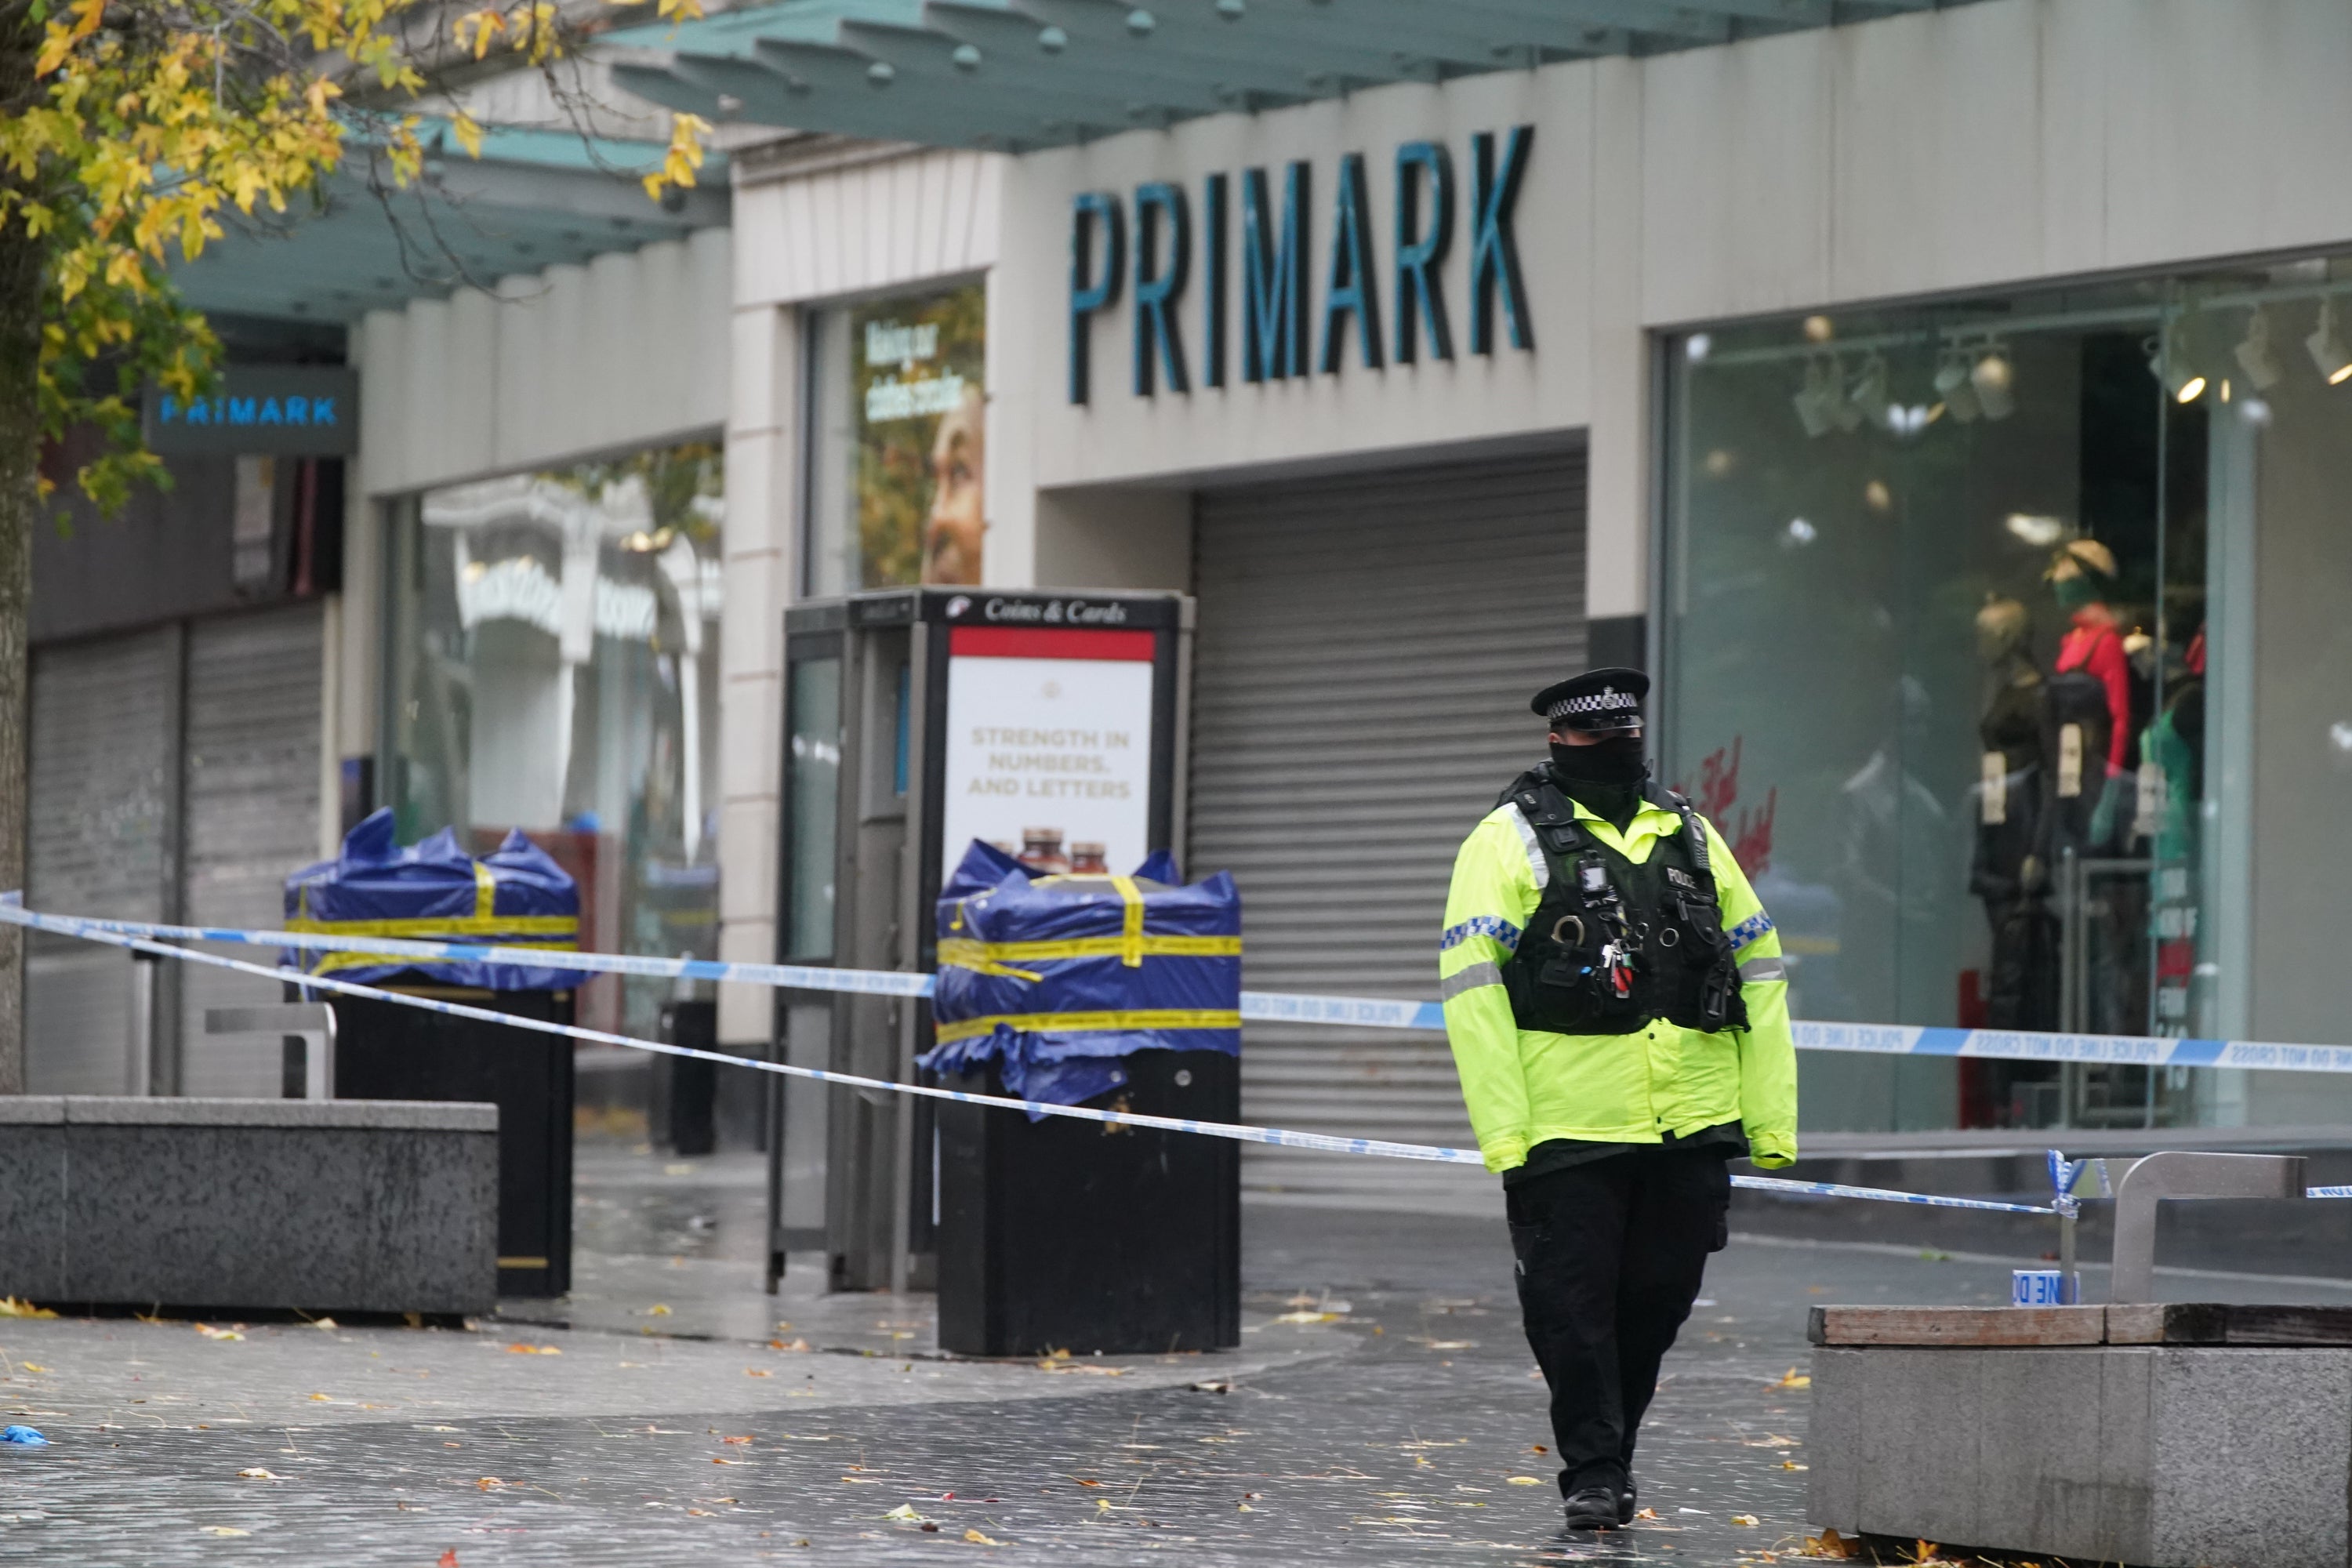 Police near the scene of the stabbing (Peter Byrne/PA)